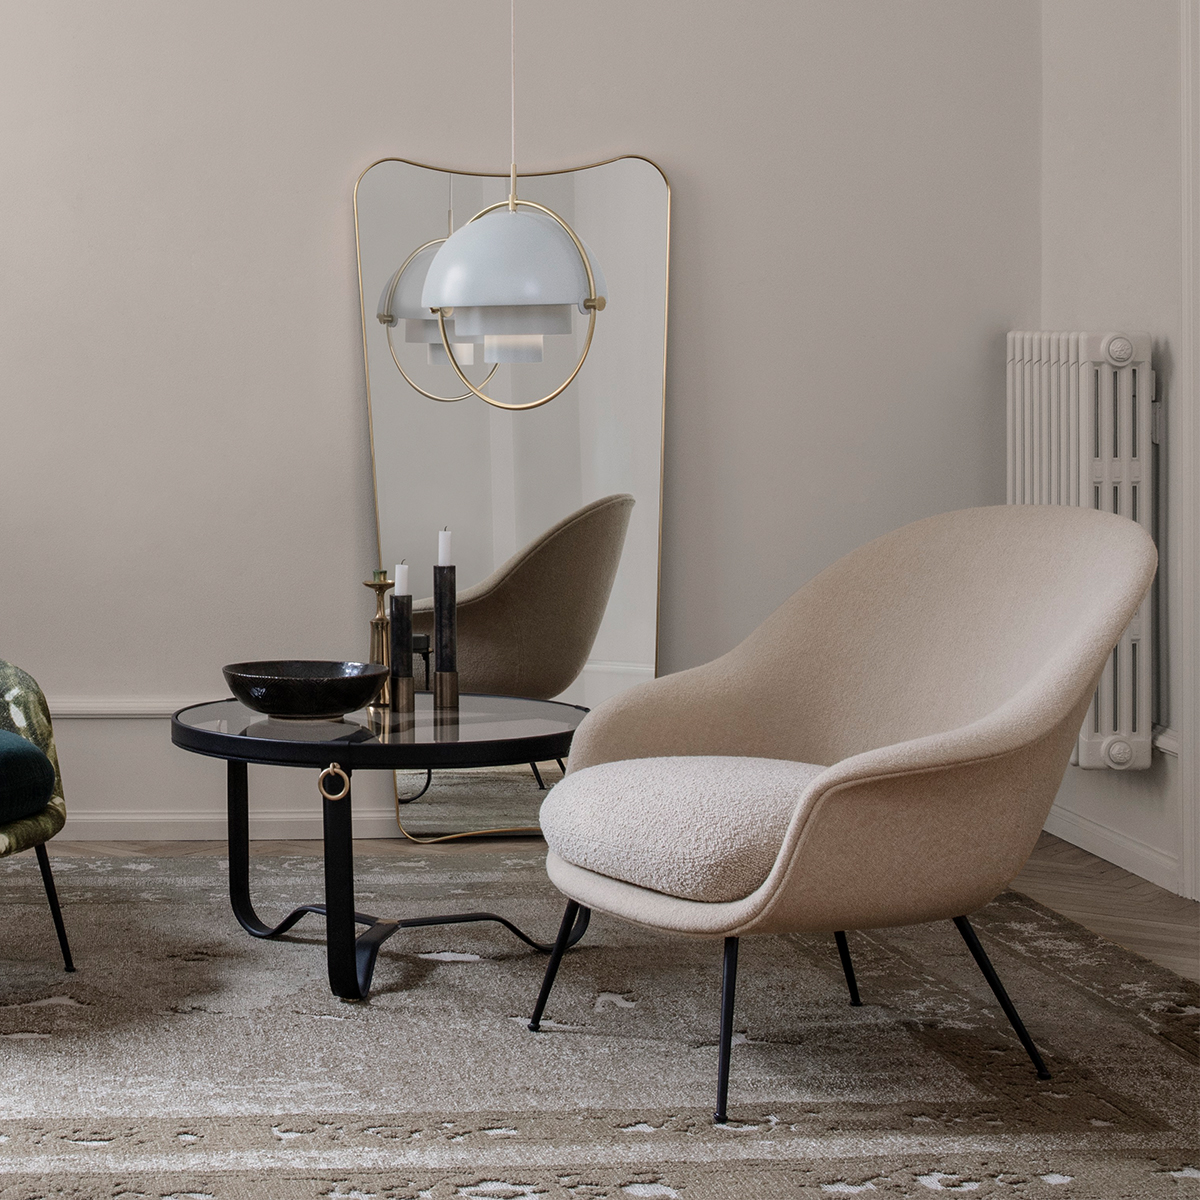 BAT LOUNGE CHAIR - The Room Living